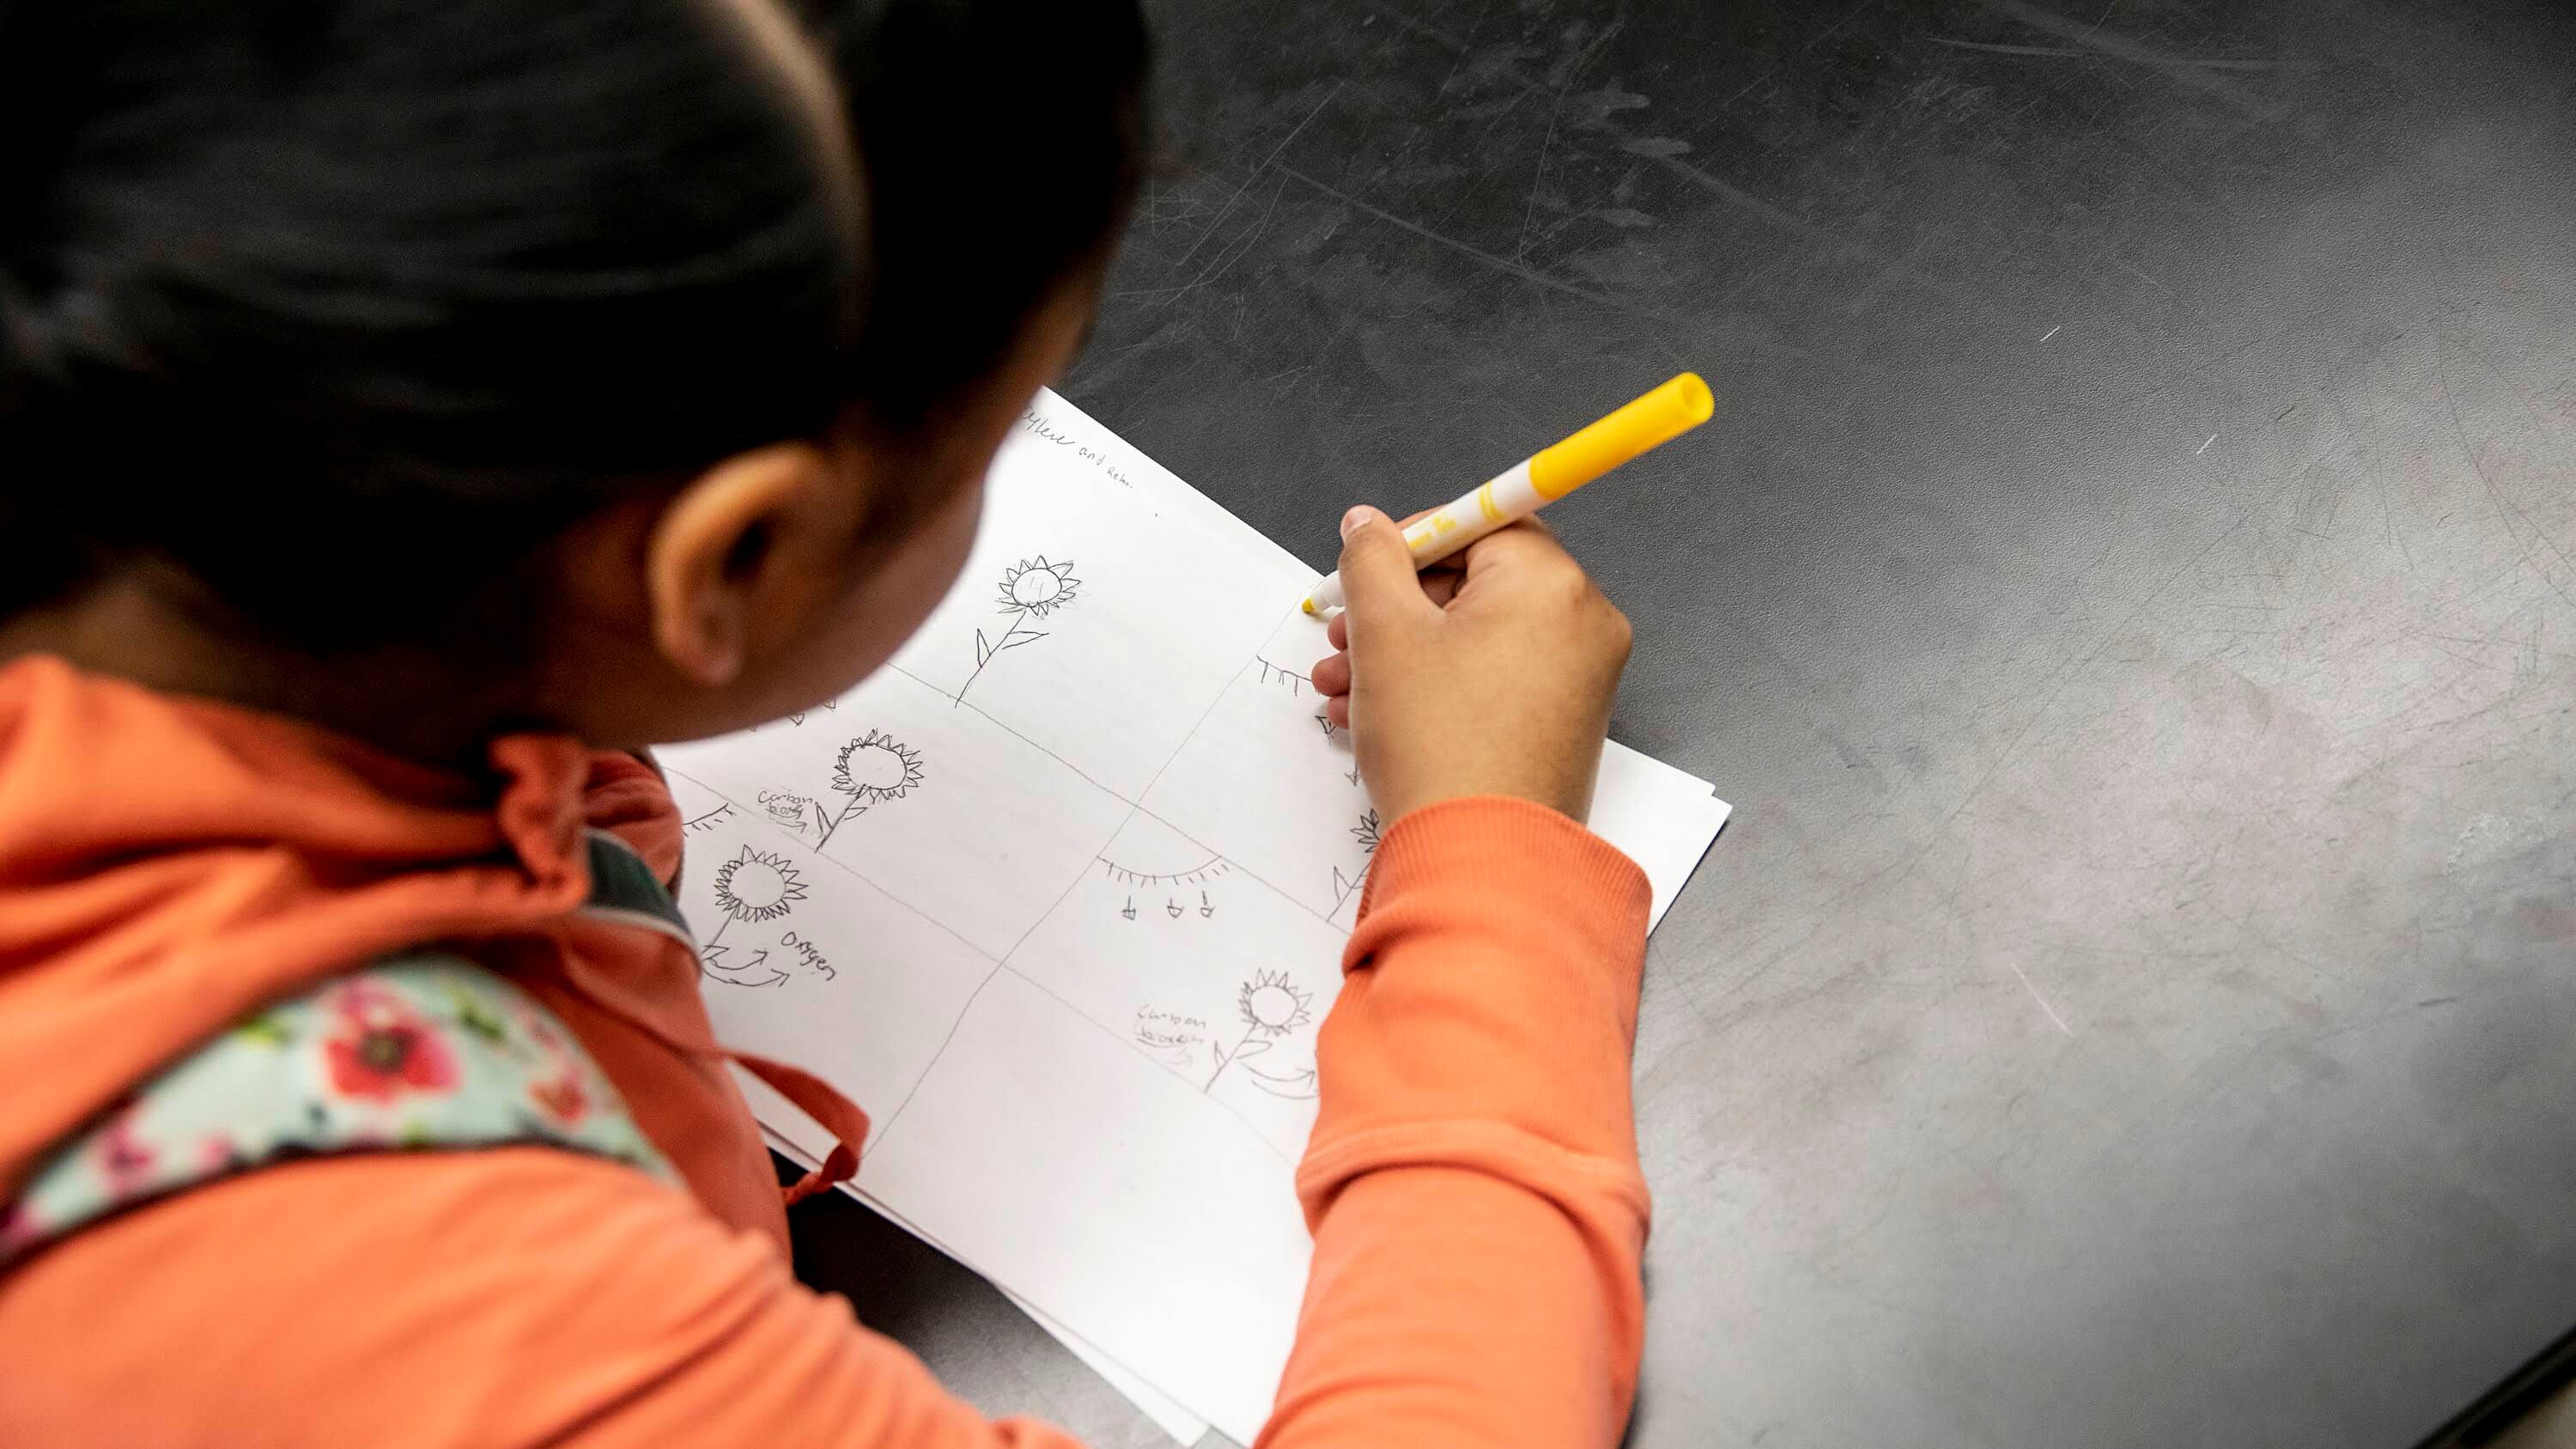 A student wearing an orange sweatshirt draws sketches on a piece of paper.